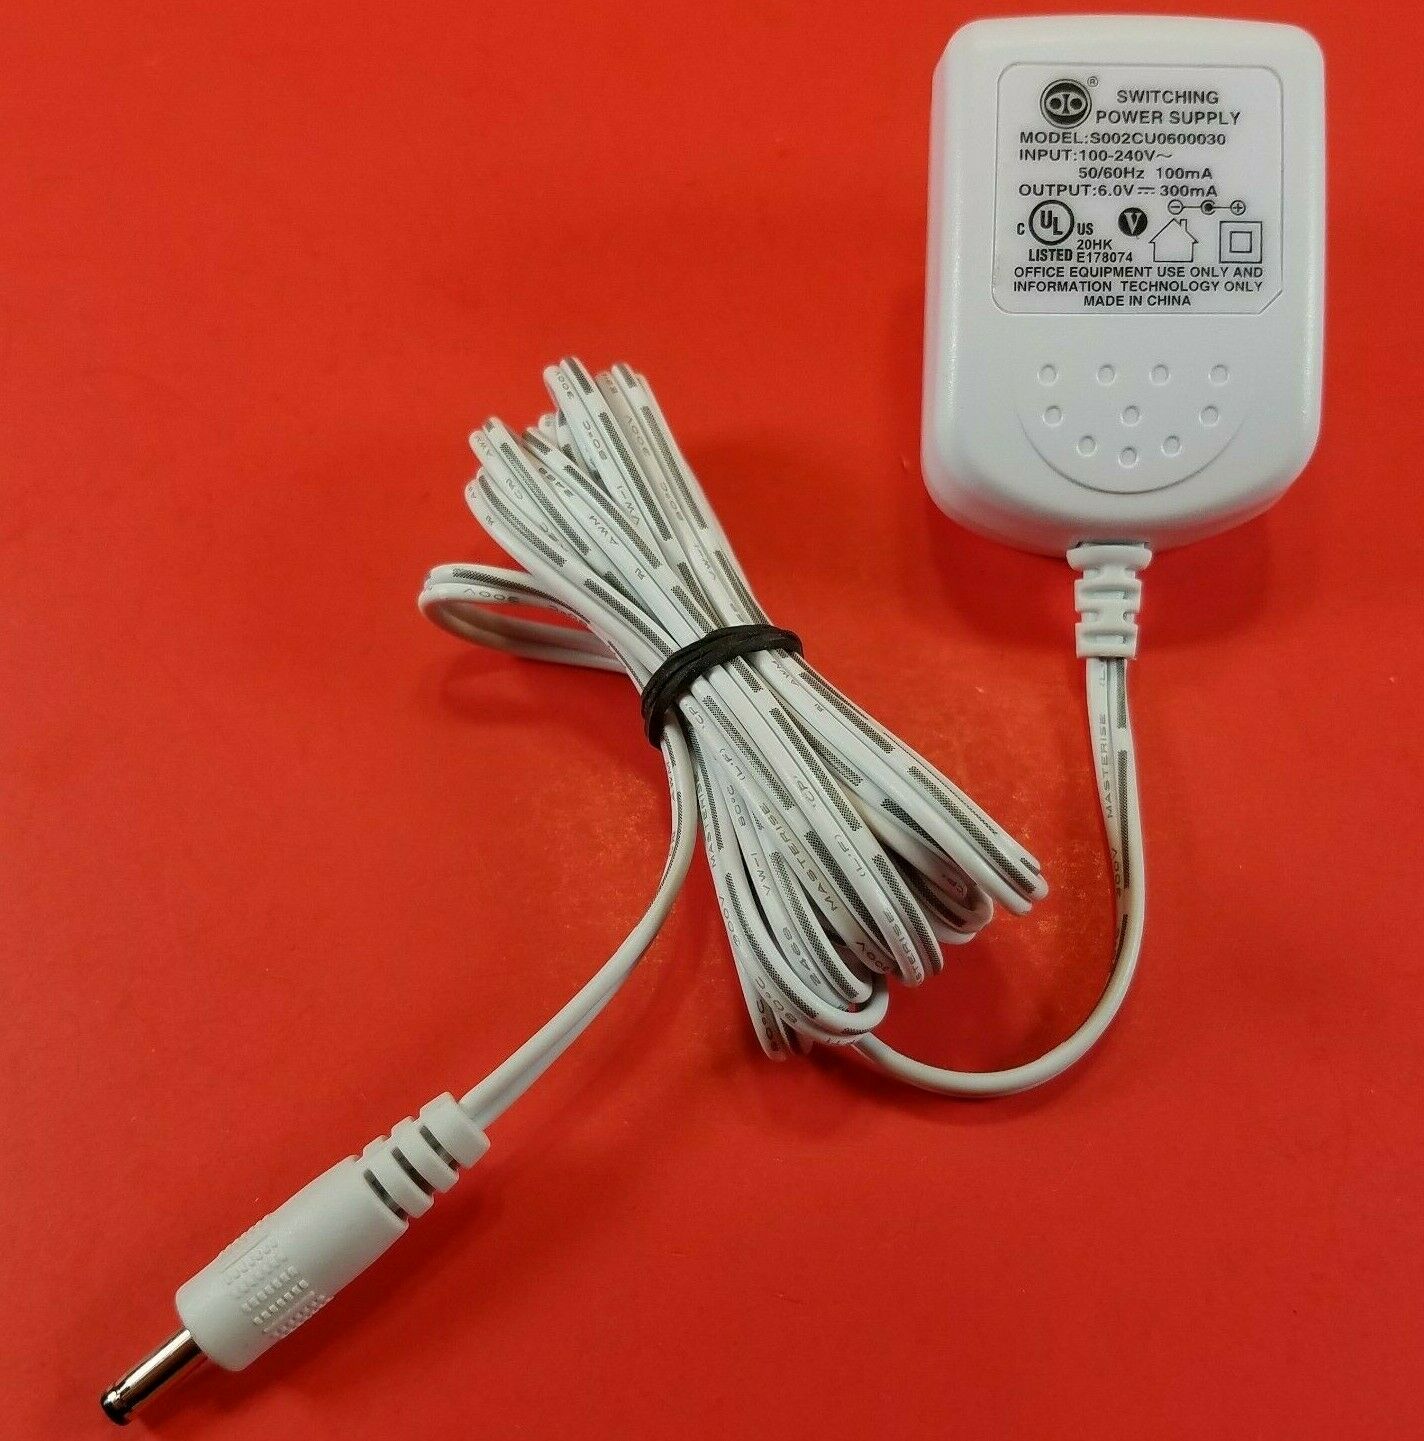 Switching Power Supply S002CU0500030 AC/DC Adapter 6V - 300mA Charger Adaptor Type: Switching Power Supply Features: - Click Image to Close